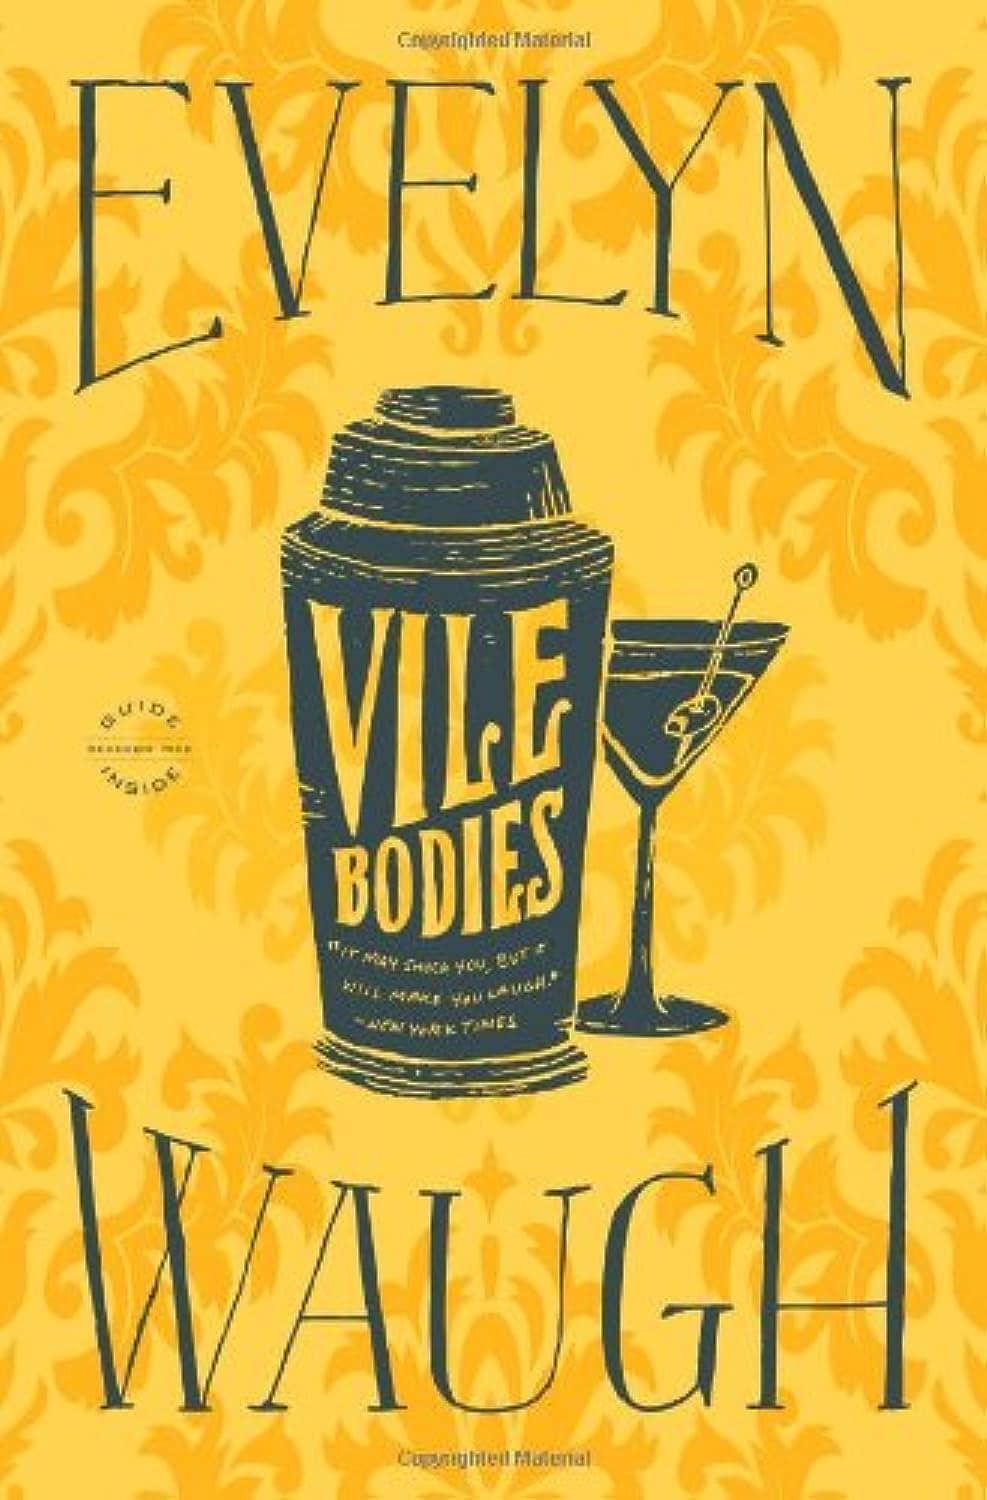 Vile Bodies by Evelyn Waugh (1930)